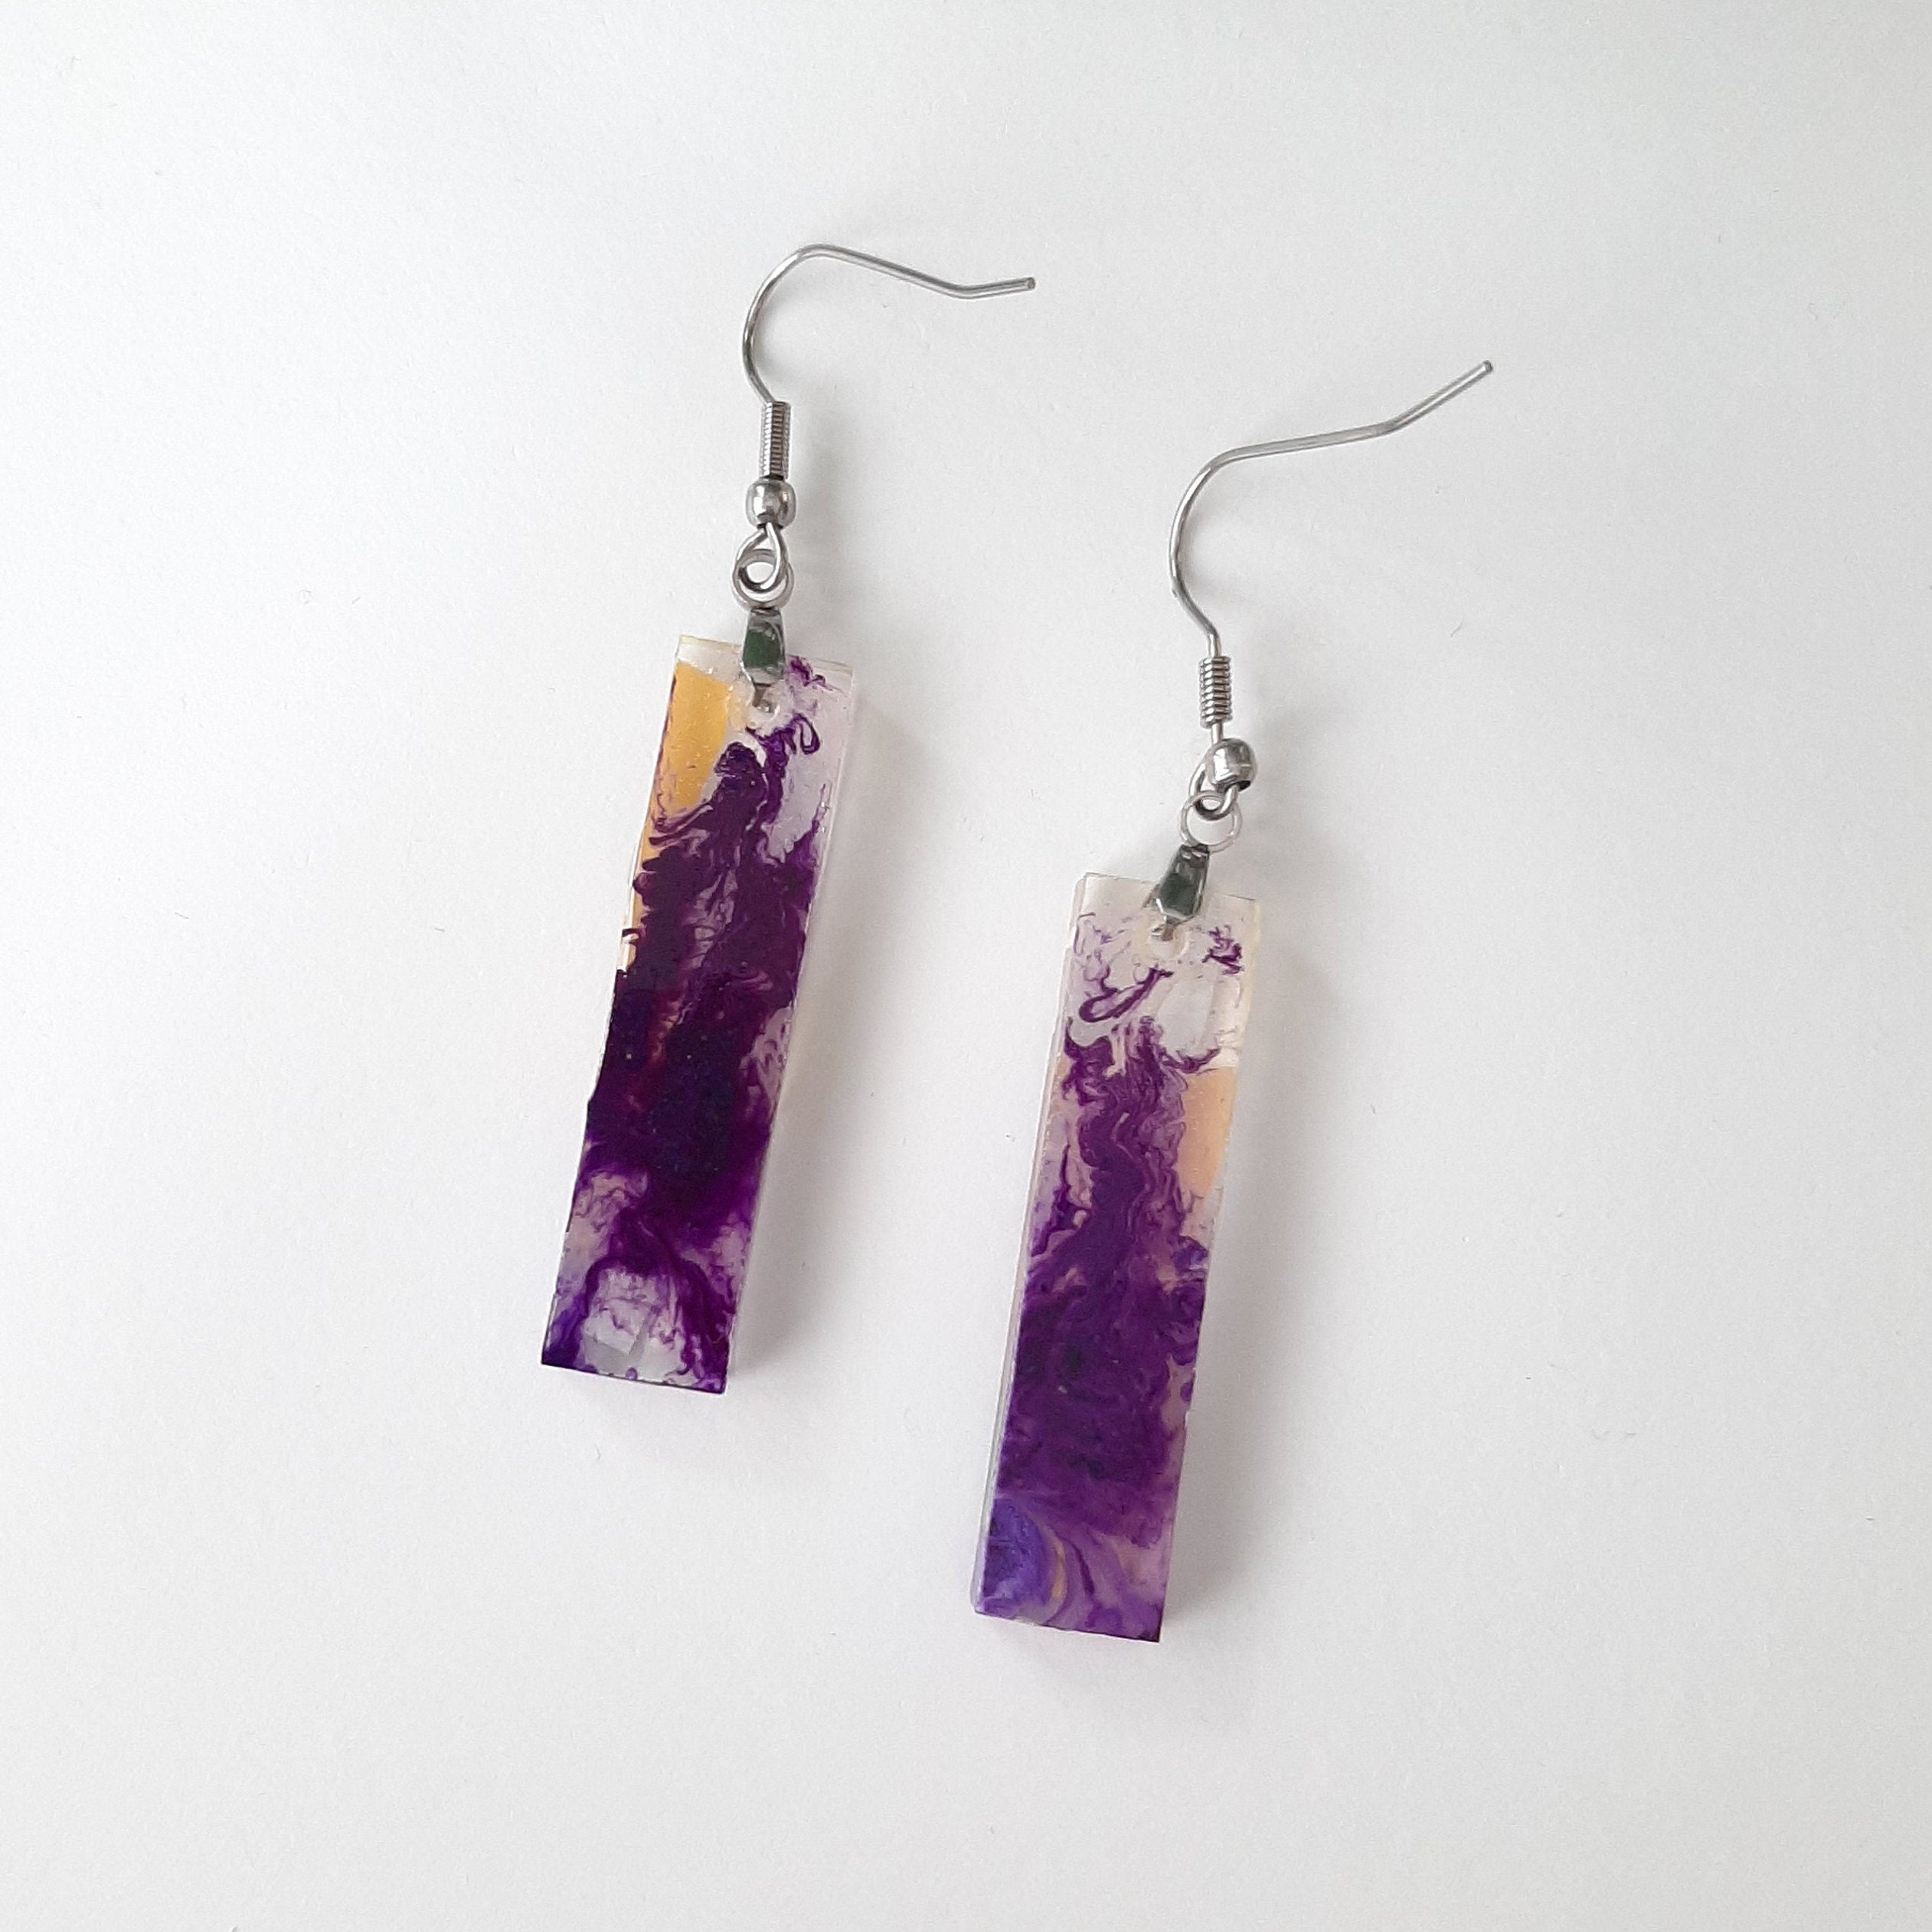 Upcycled Plastic, Resin and Alcohol Ink Yellow and Purple Earrings | Made from recycled materials